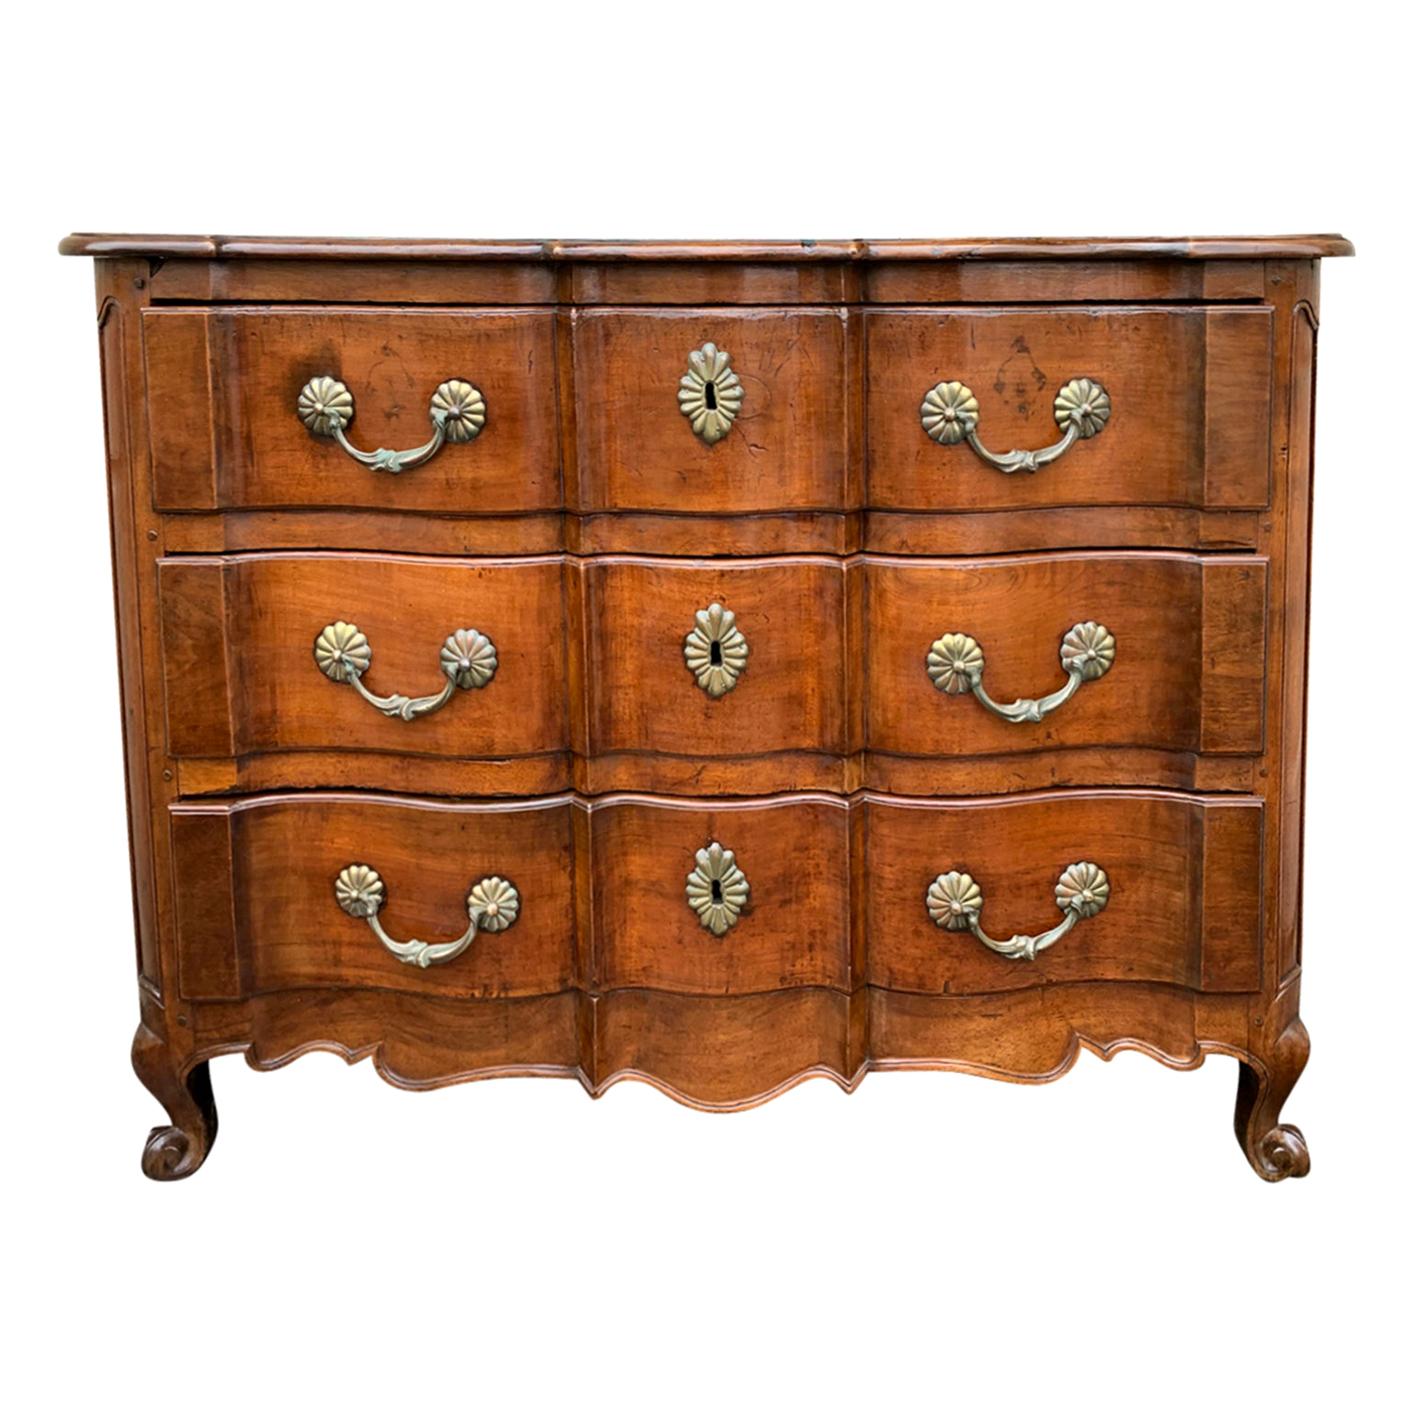 18th-19th Century French Louis XV Style Fruitwood Commode / Chest, Three Drawers